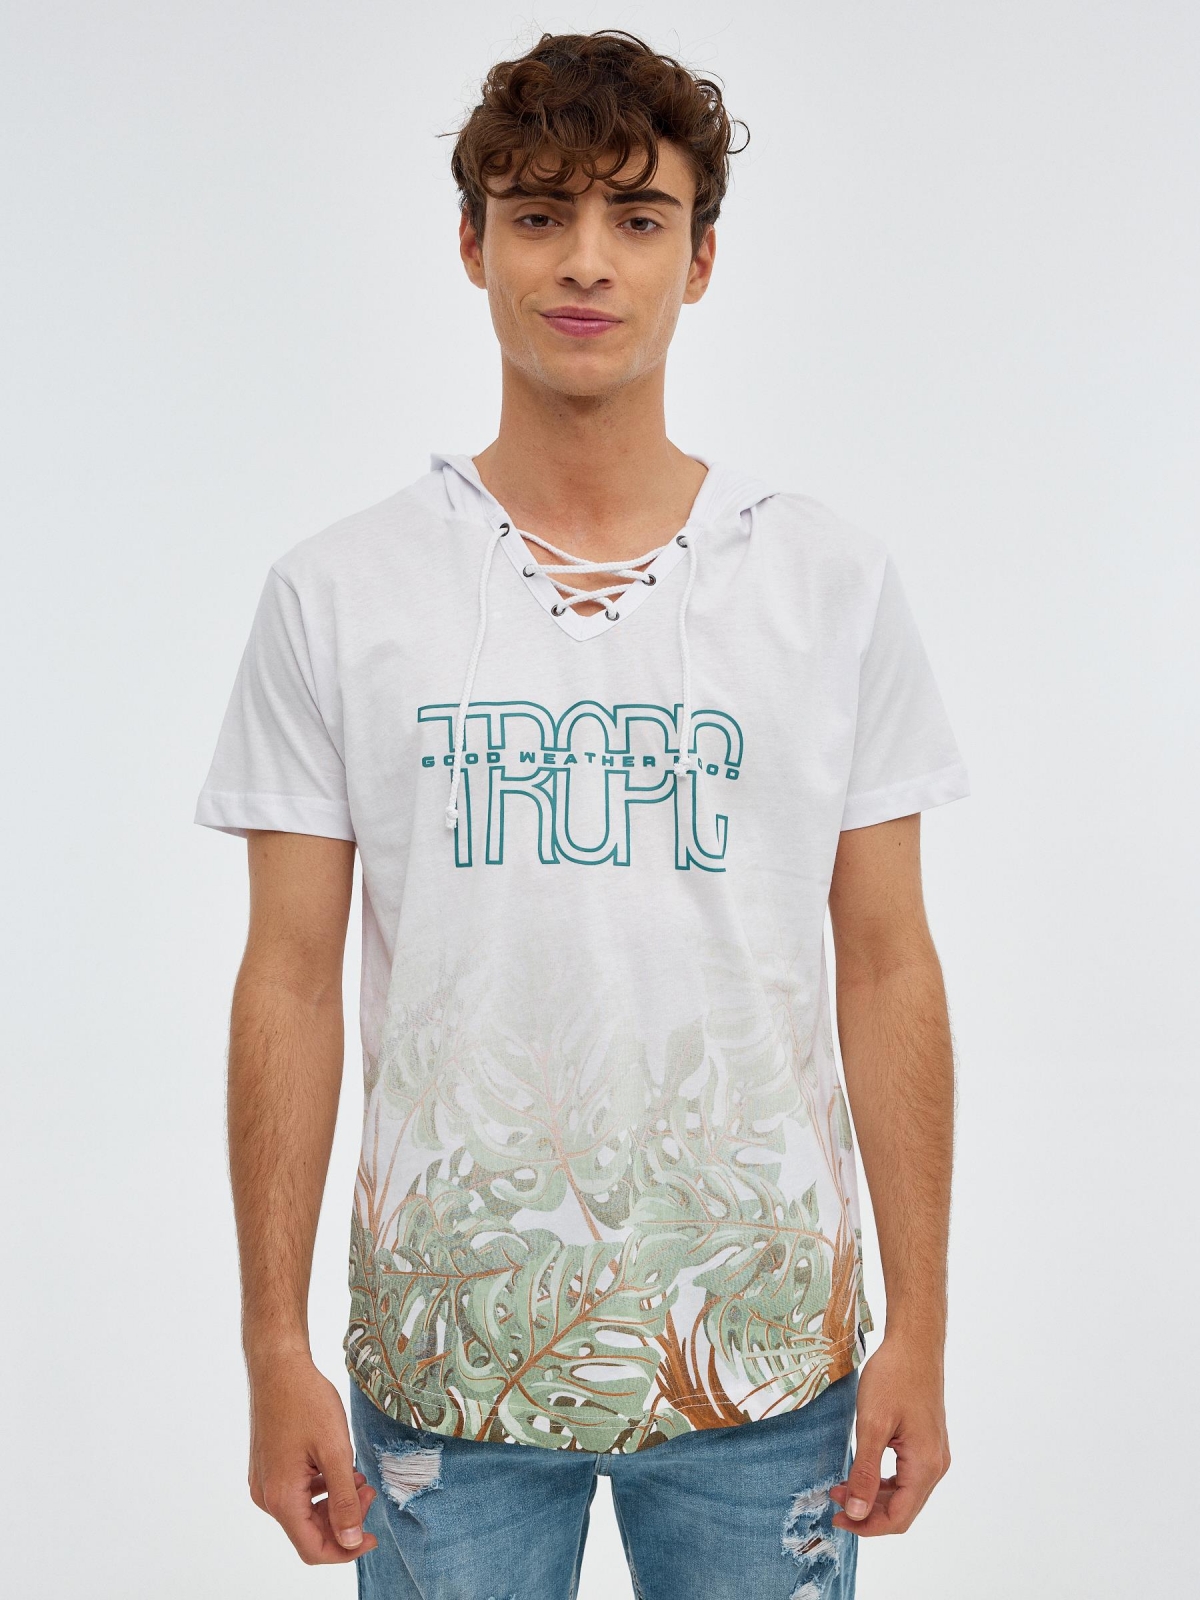 Tropic T-shirt white middle front view